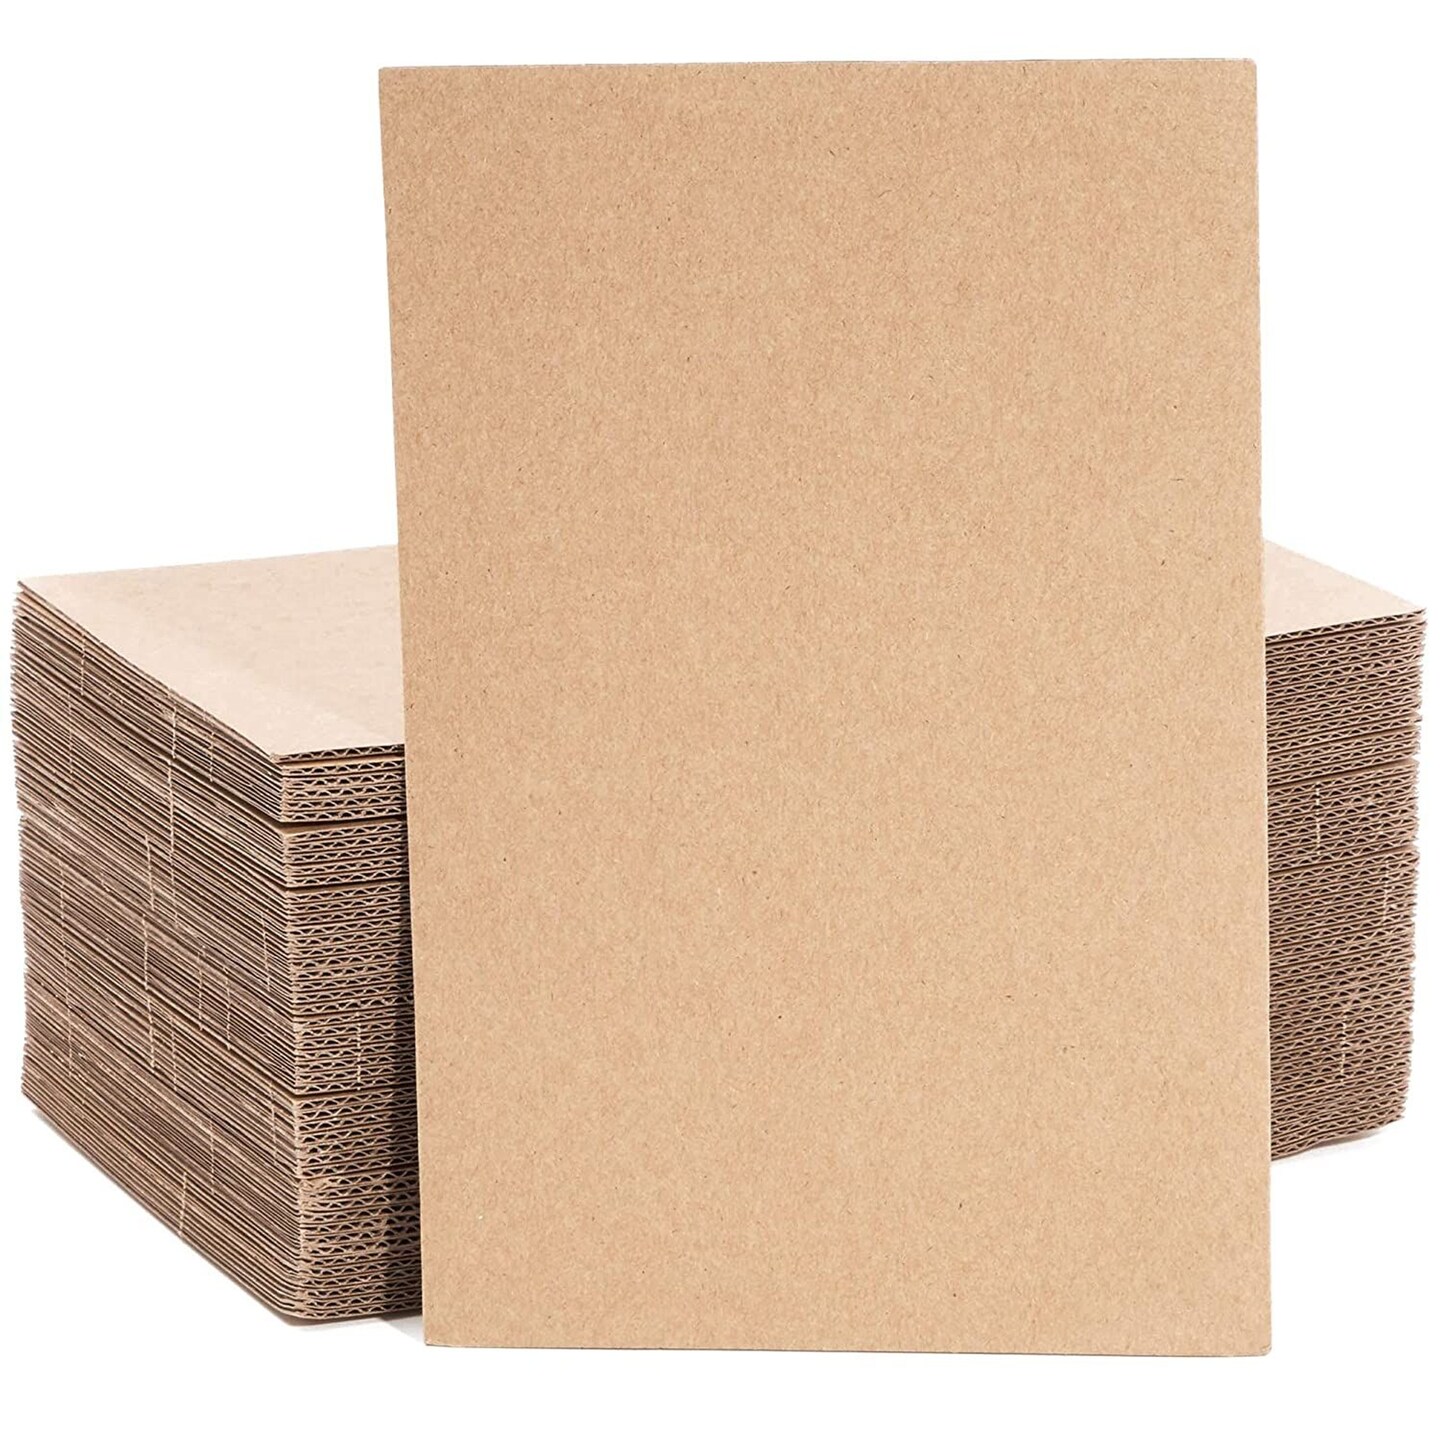 50 Pack Corrugated Cardboard Sheets 6x9, Flat Packaging Inserts for Packing, Shipping, Mailing (2mm Thick)